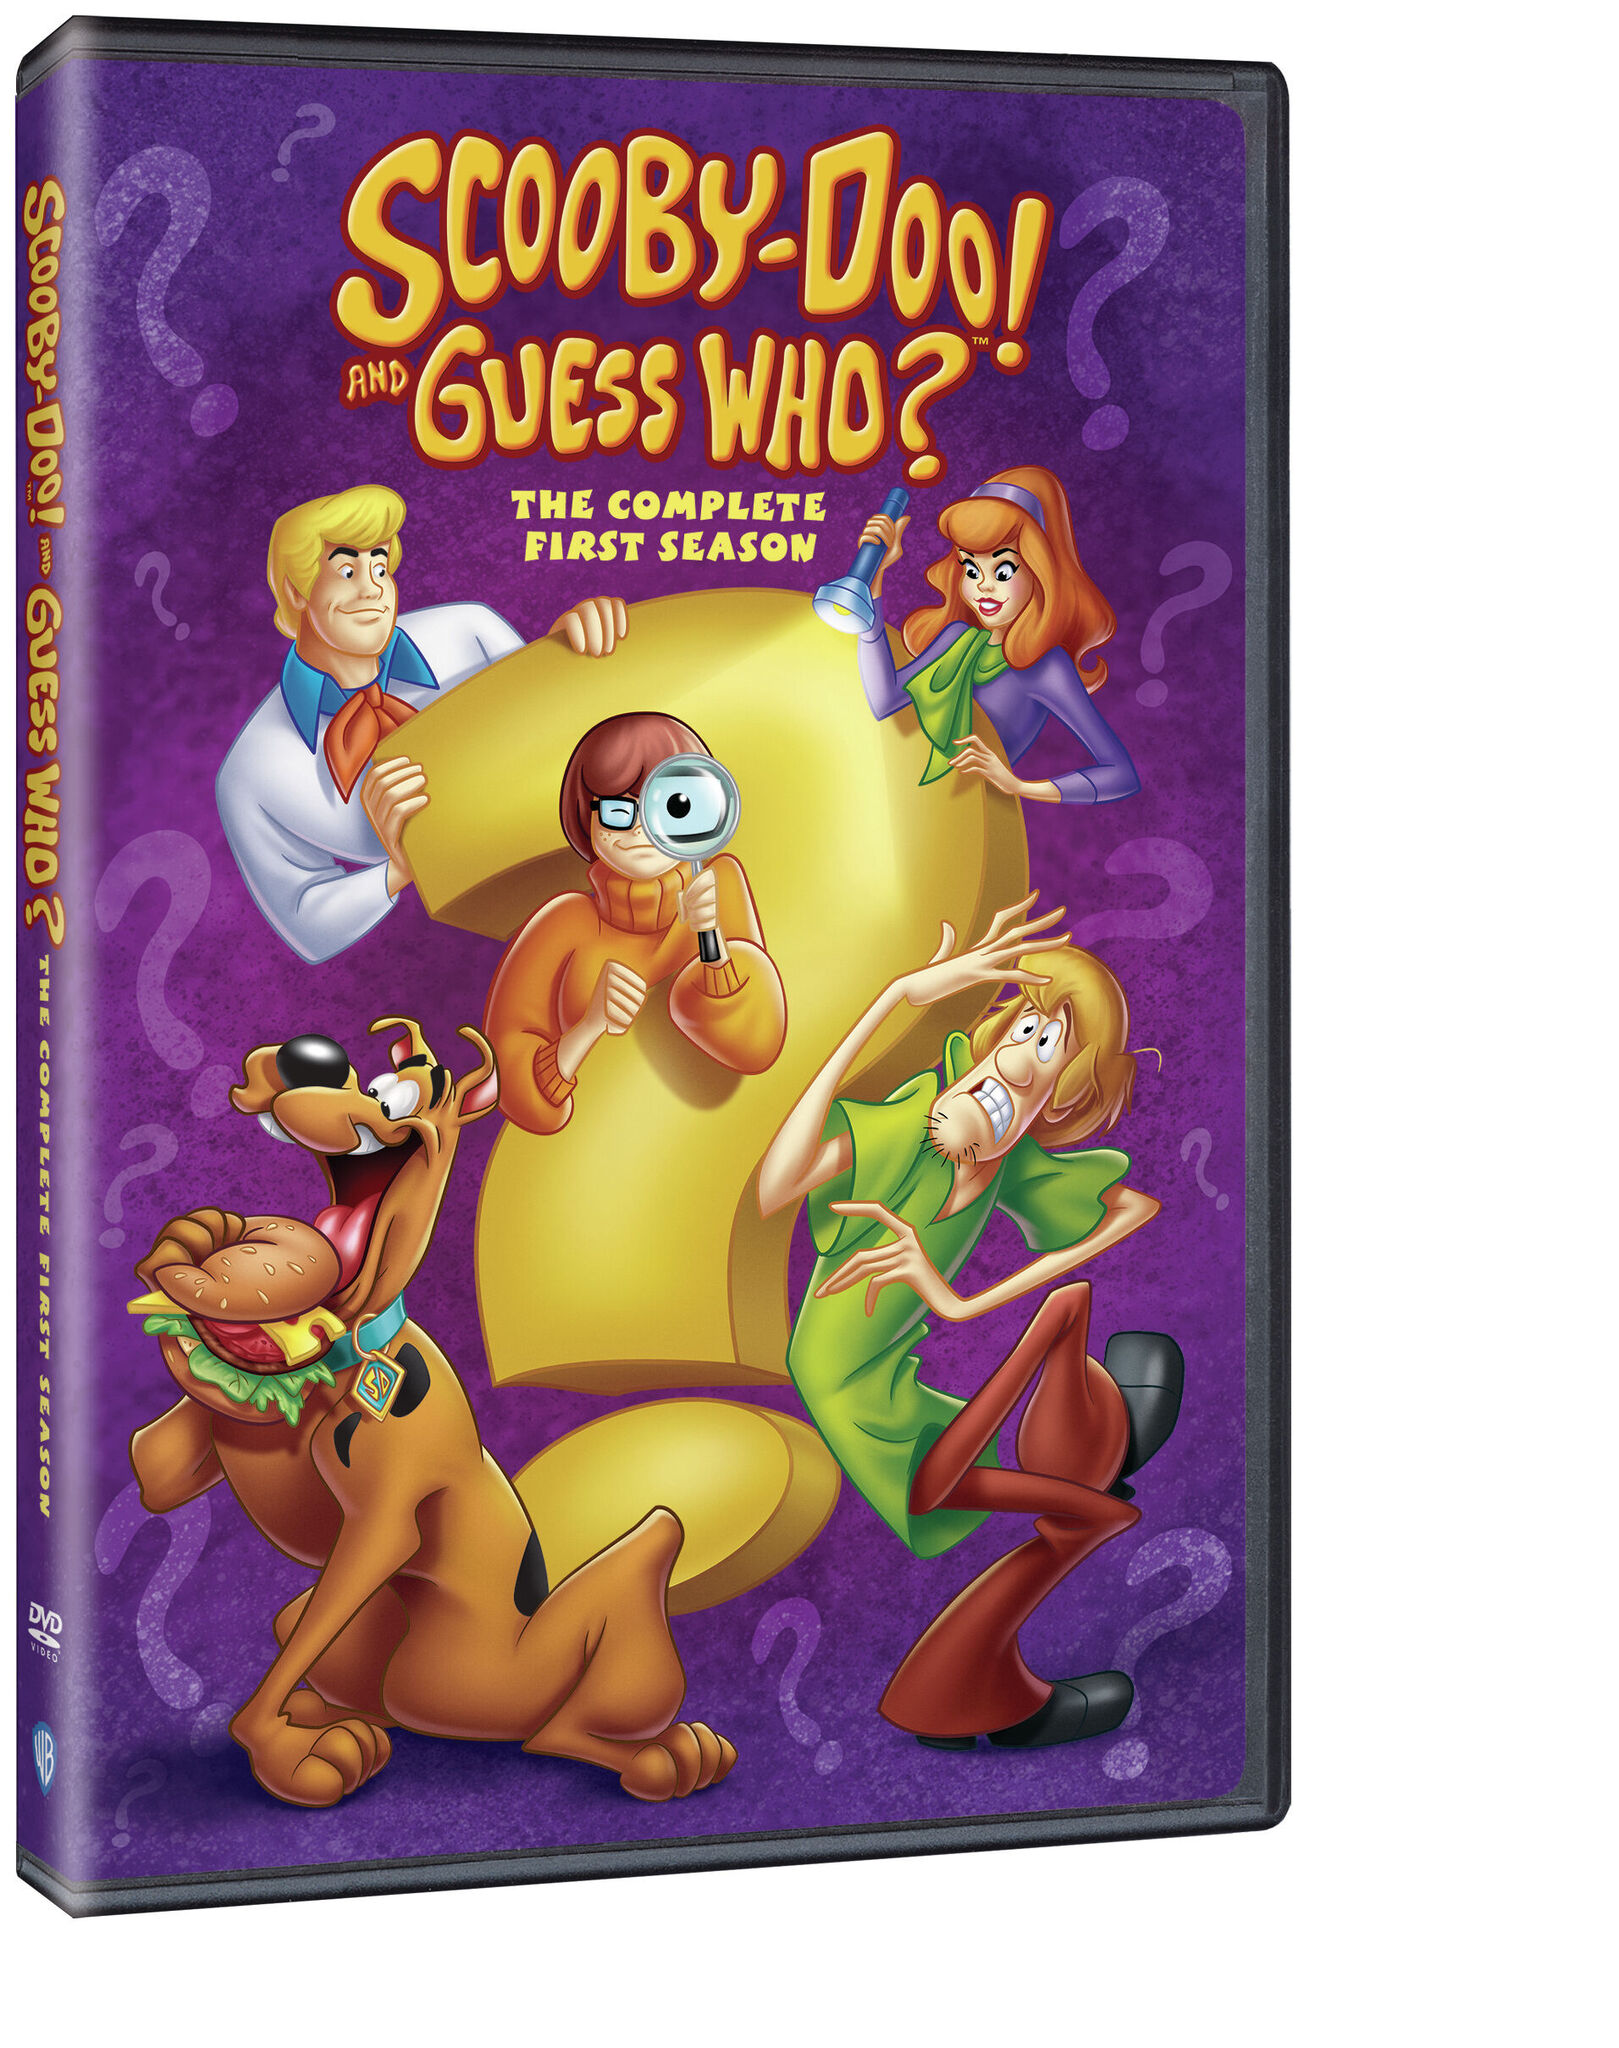 ScoobyAddict's Blog: Scooby-Doo! and Guess Who? The Complete First Season  Press Release - WB